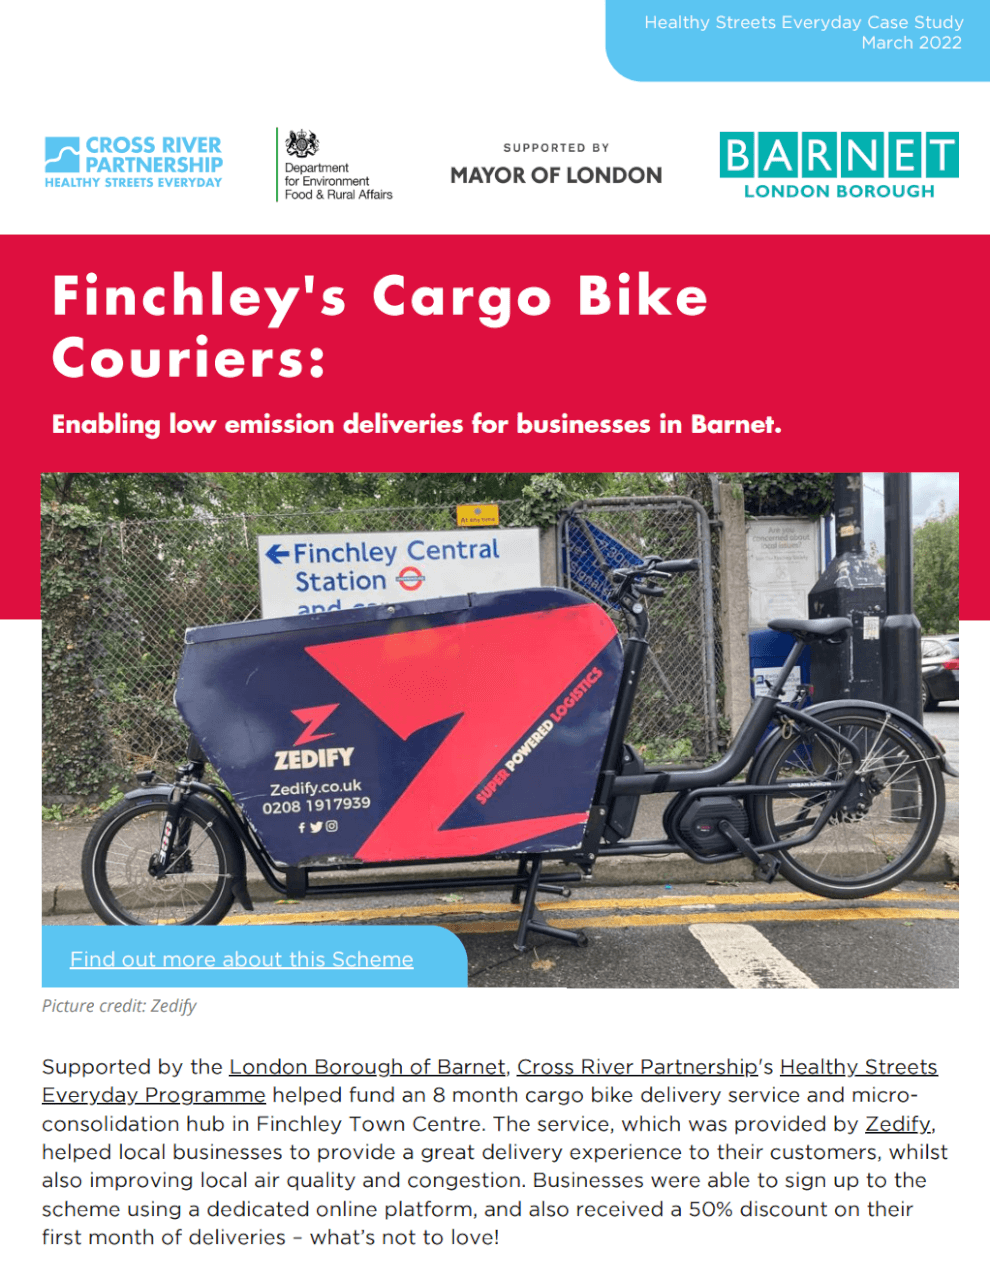 Finchley’s Cargo Bike Couriers: Enabling low emission deliveries for businesses in Barnet – Healthy Streets Everyday Case Study 2022